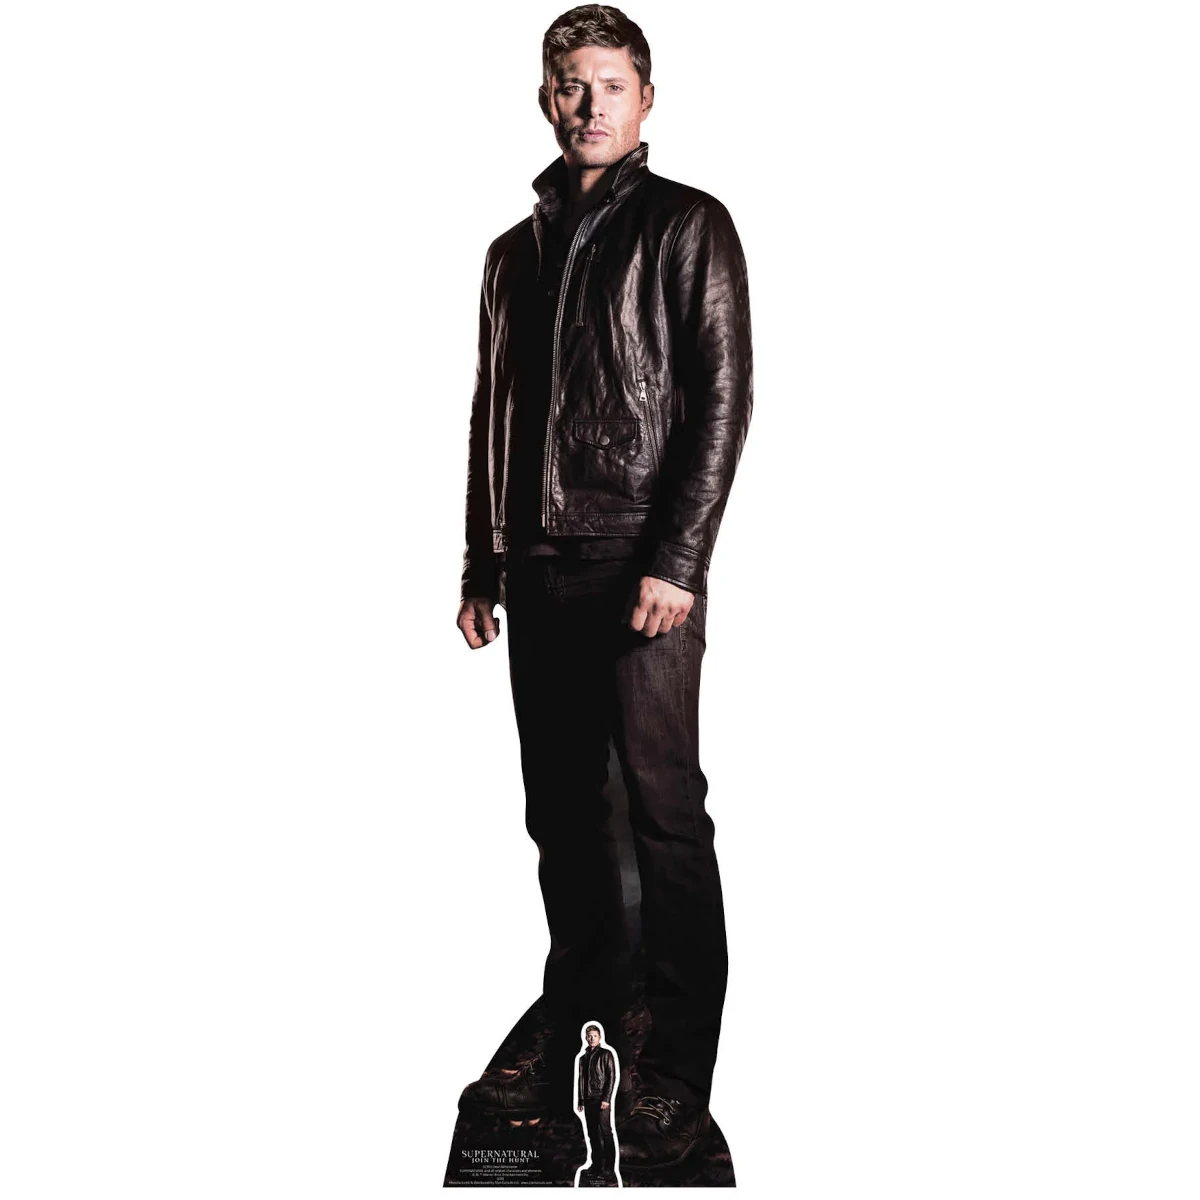 SC983 Dean Winchester 'Jensen Ackles' (Supernatural) Official Lifesize + Mini Cardboard Cutout Standee Front